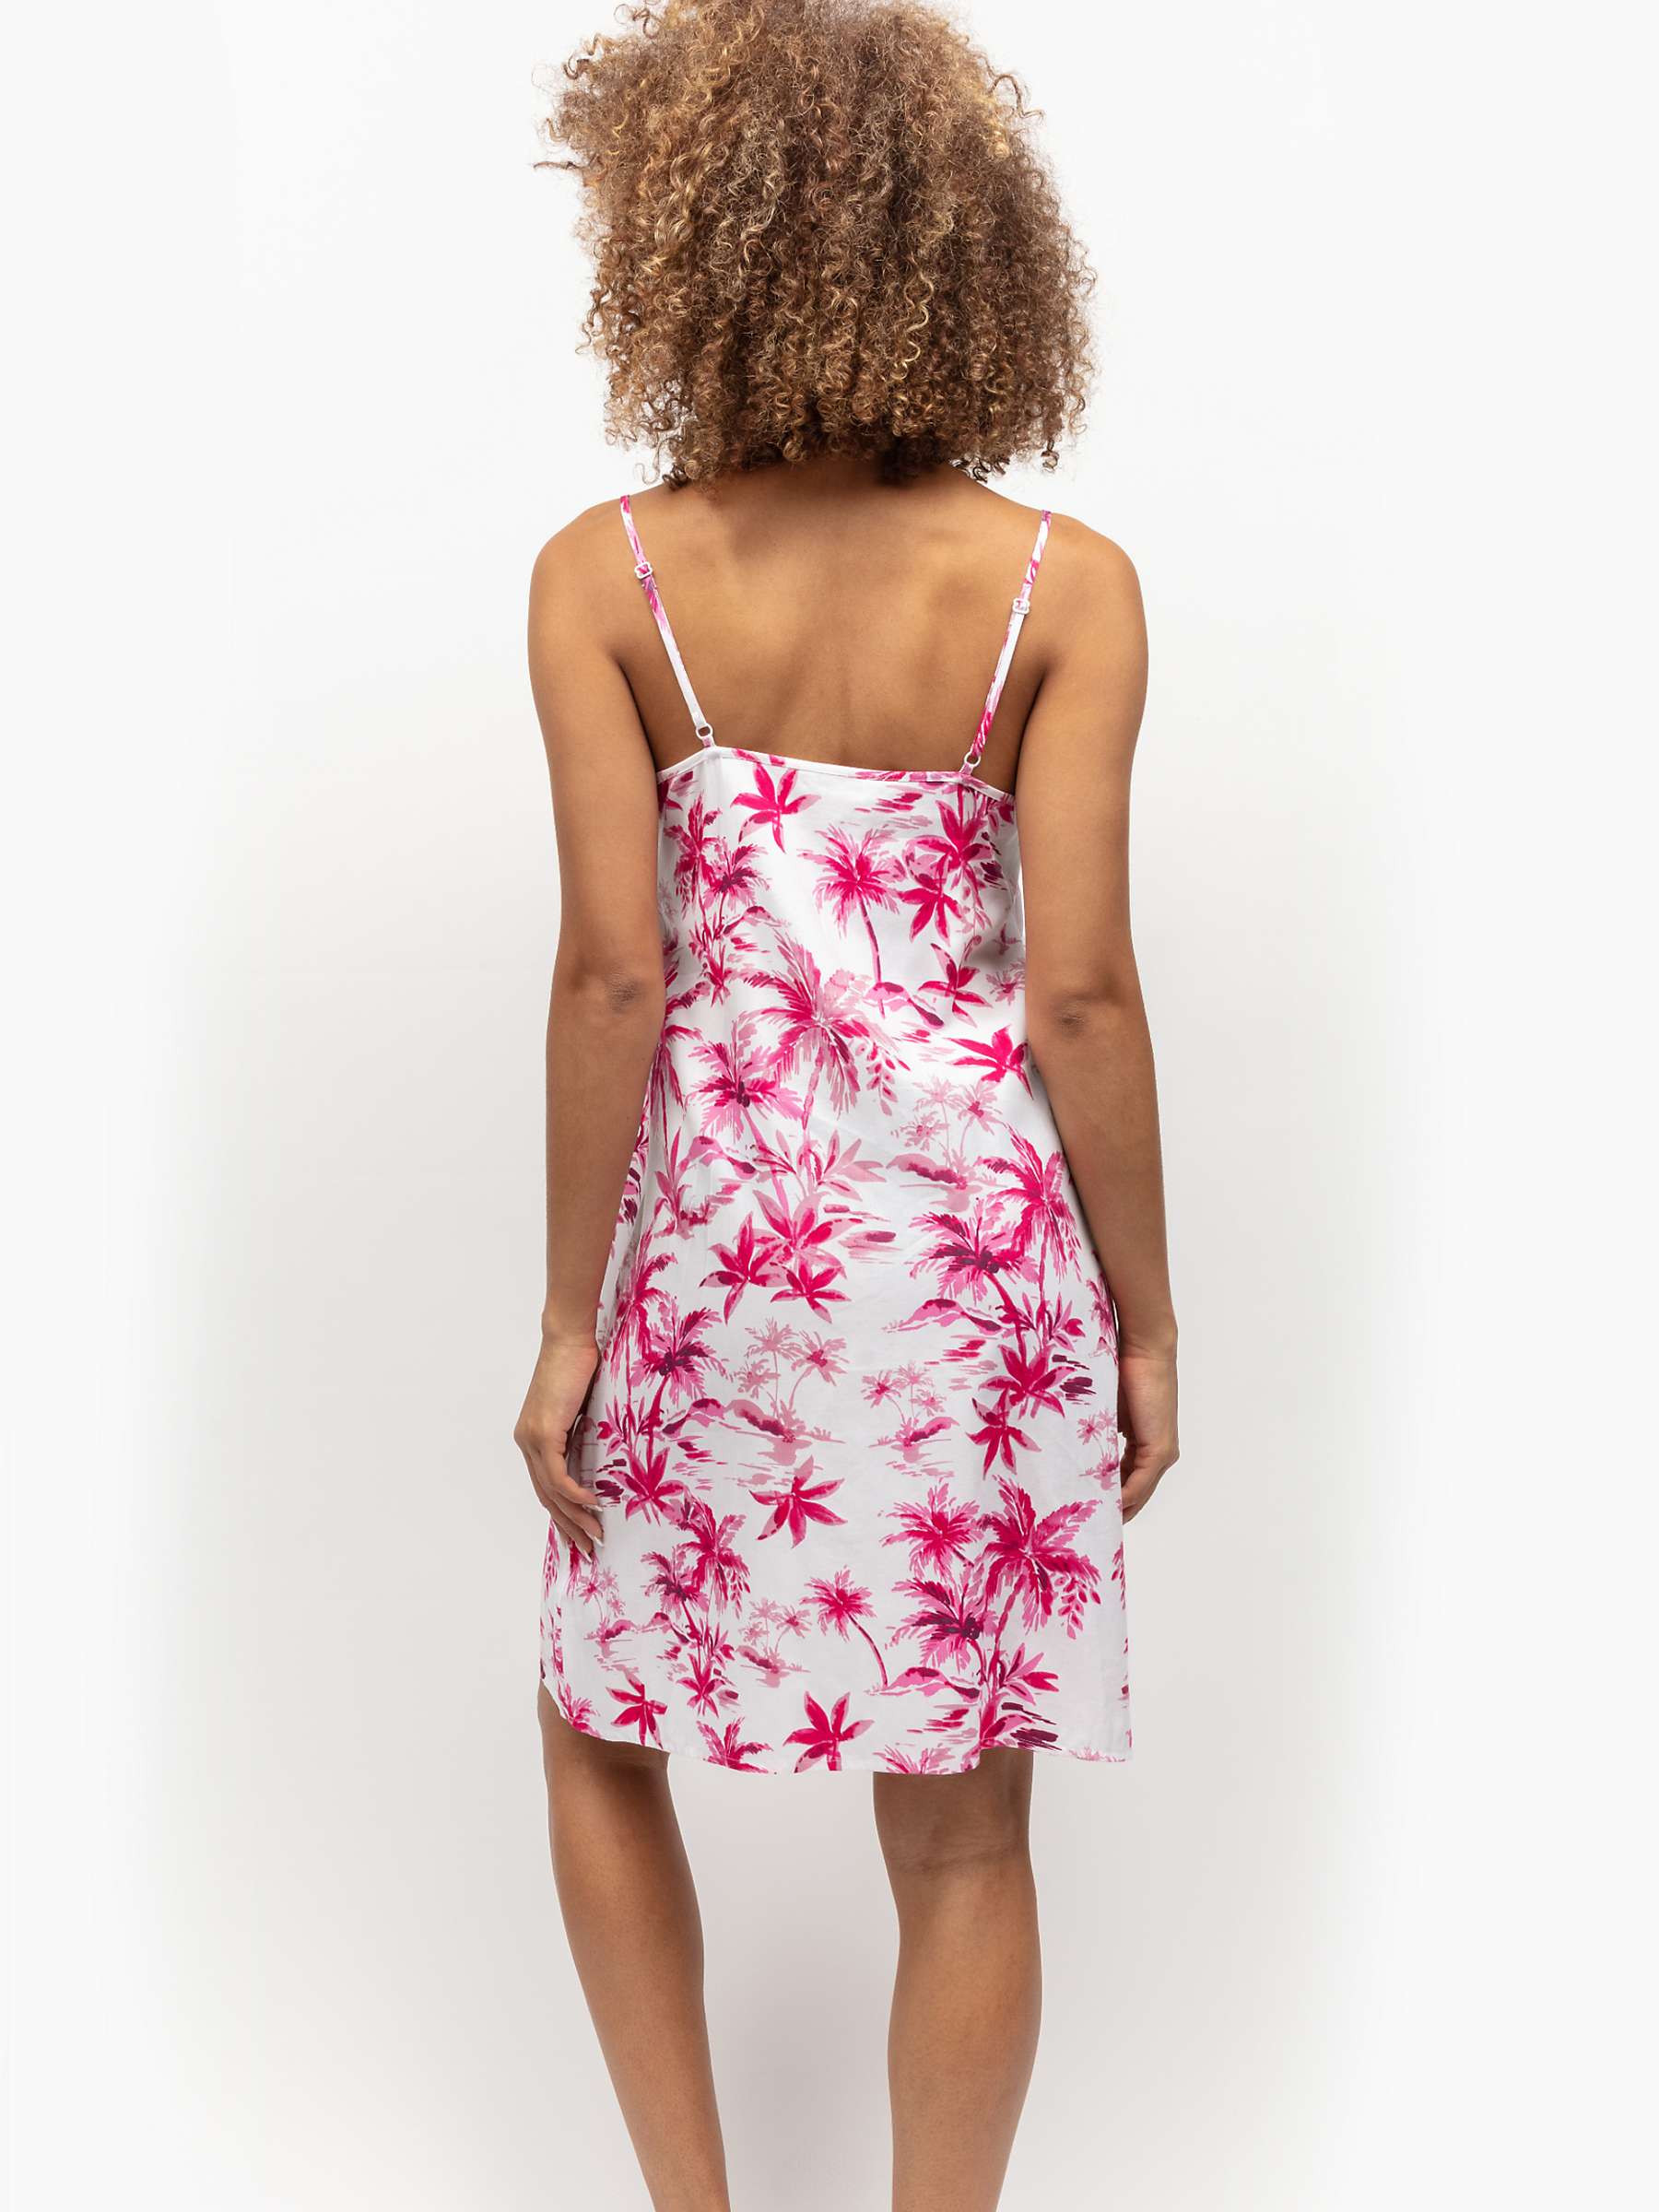 Buy Cyberjammies Hailey Palm Nightdress, White/Pink Online at johnlewis.com